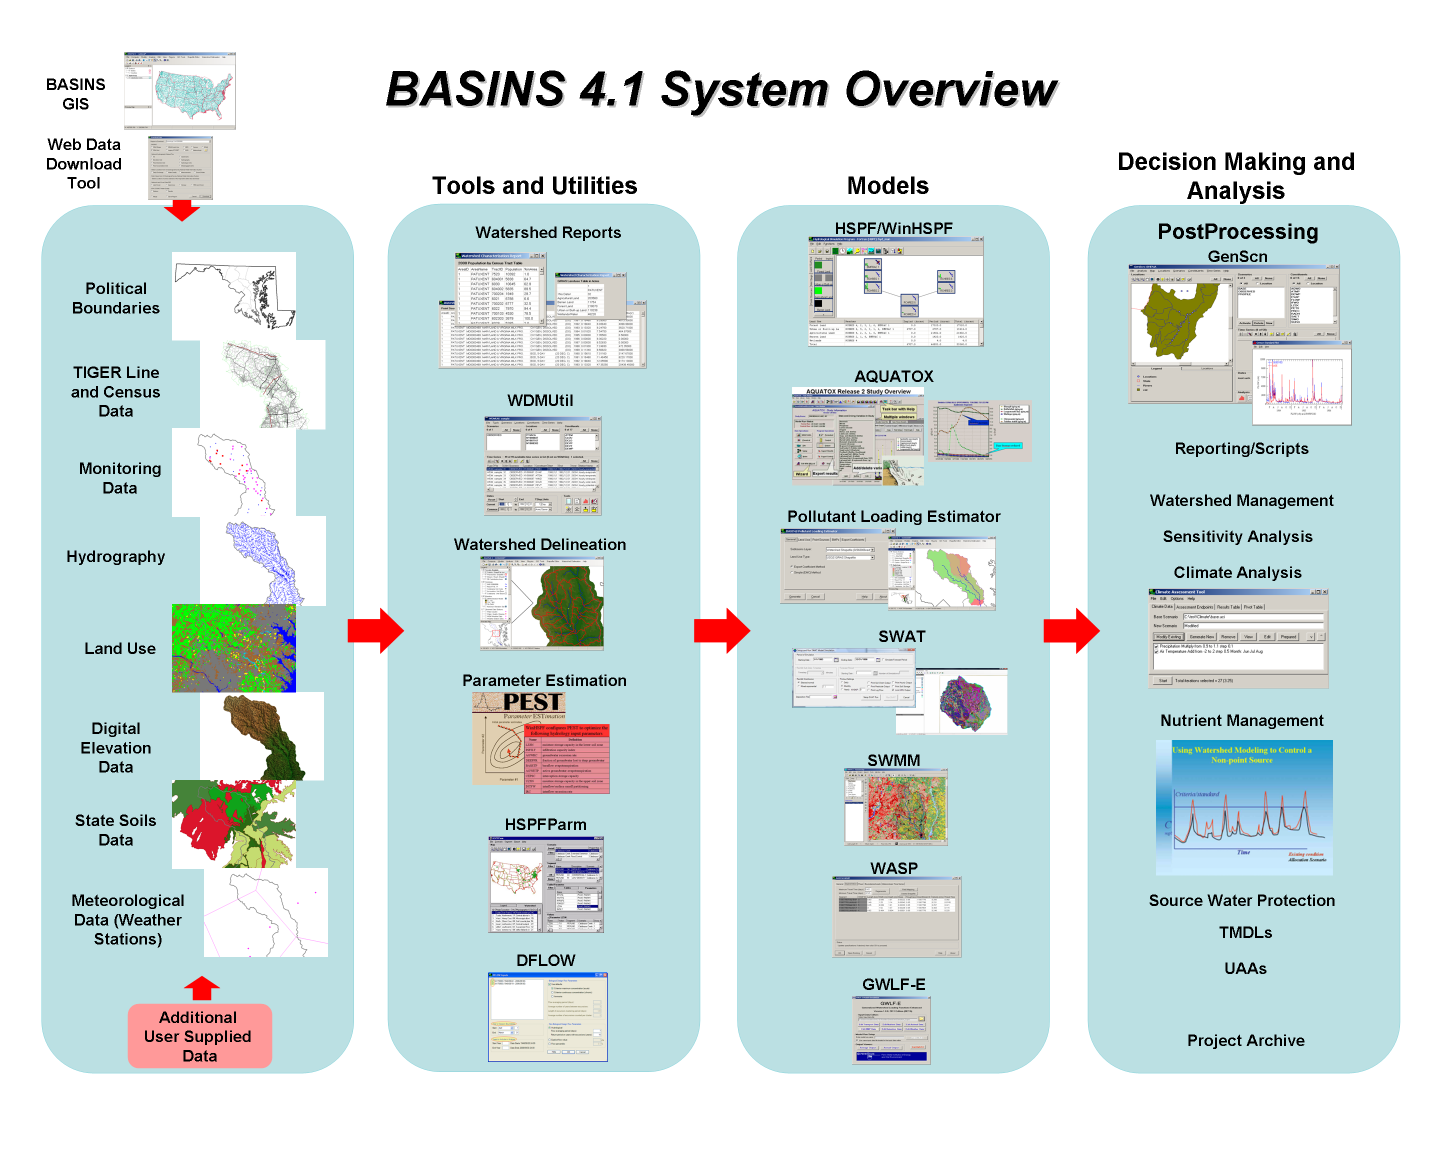 Overview of the BASINS 4.1 System